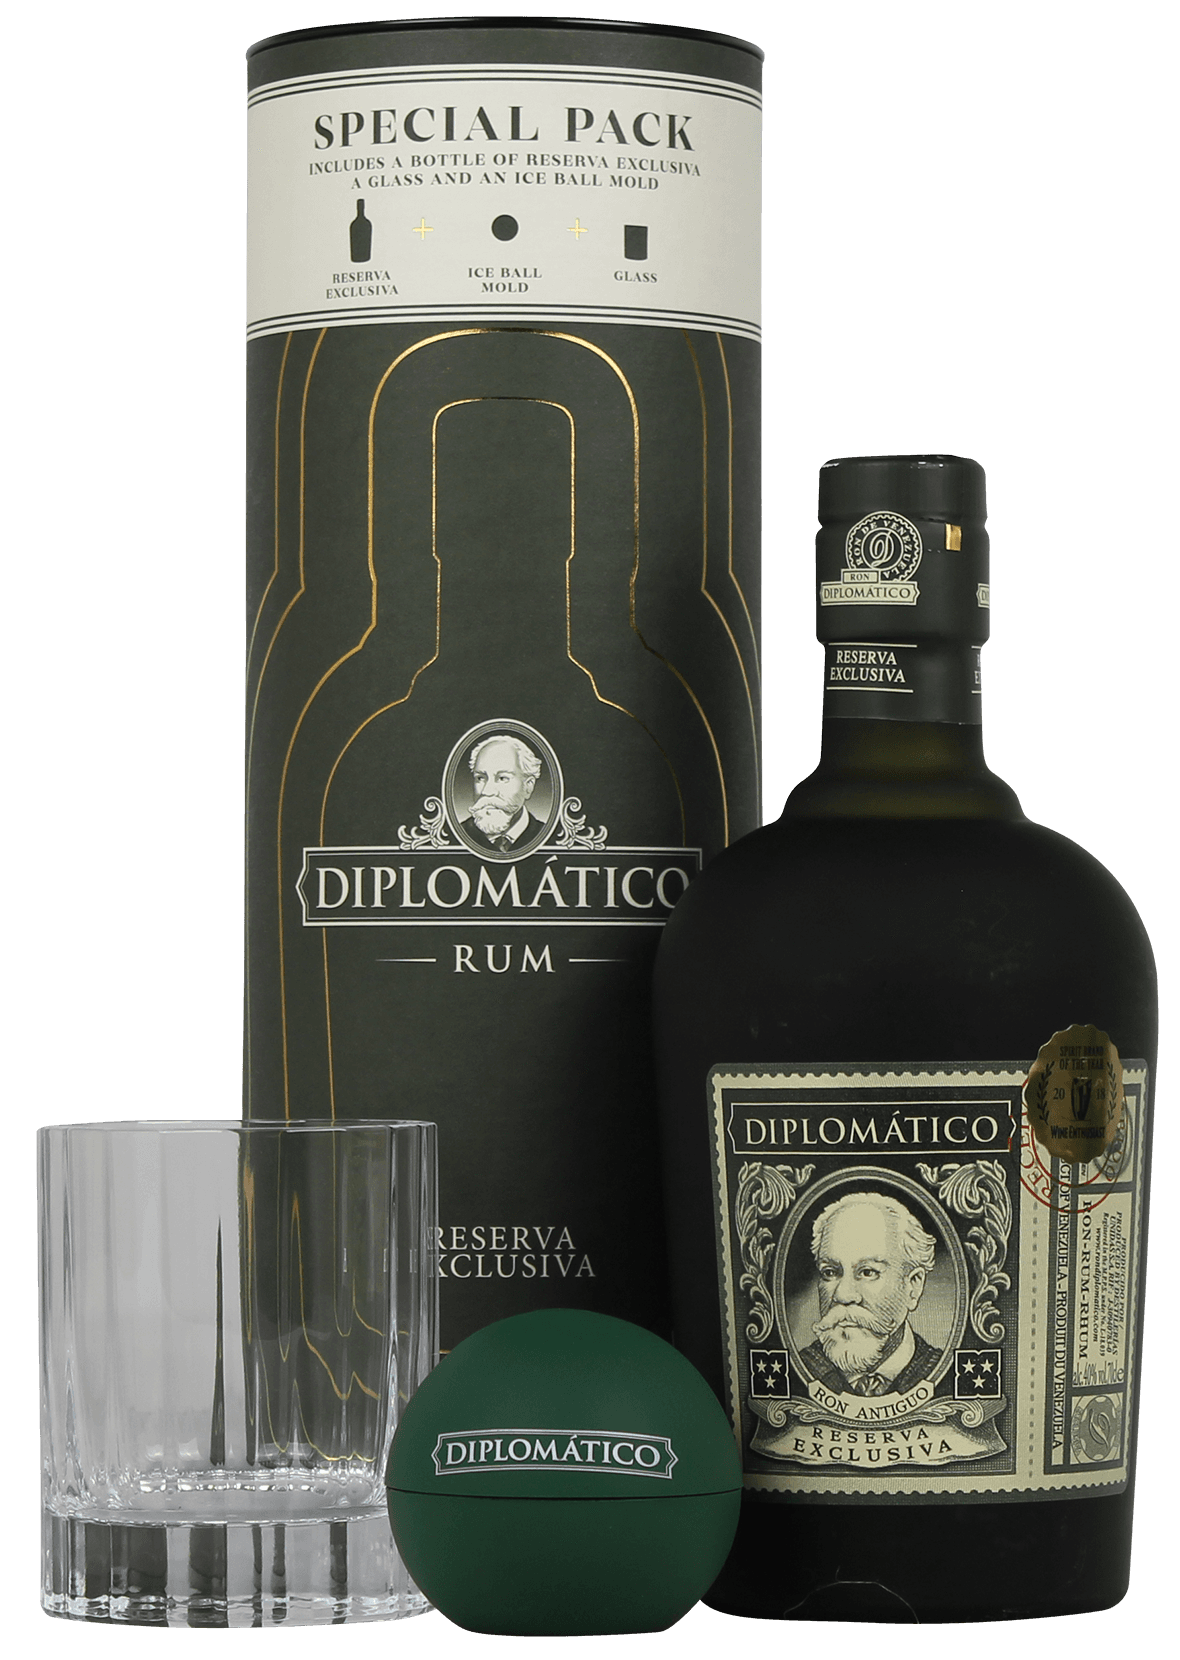 Ron Diplomatico Exclusiva 40% Tall | Canister Caribe - Reserva alcohol Kaliman Rum